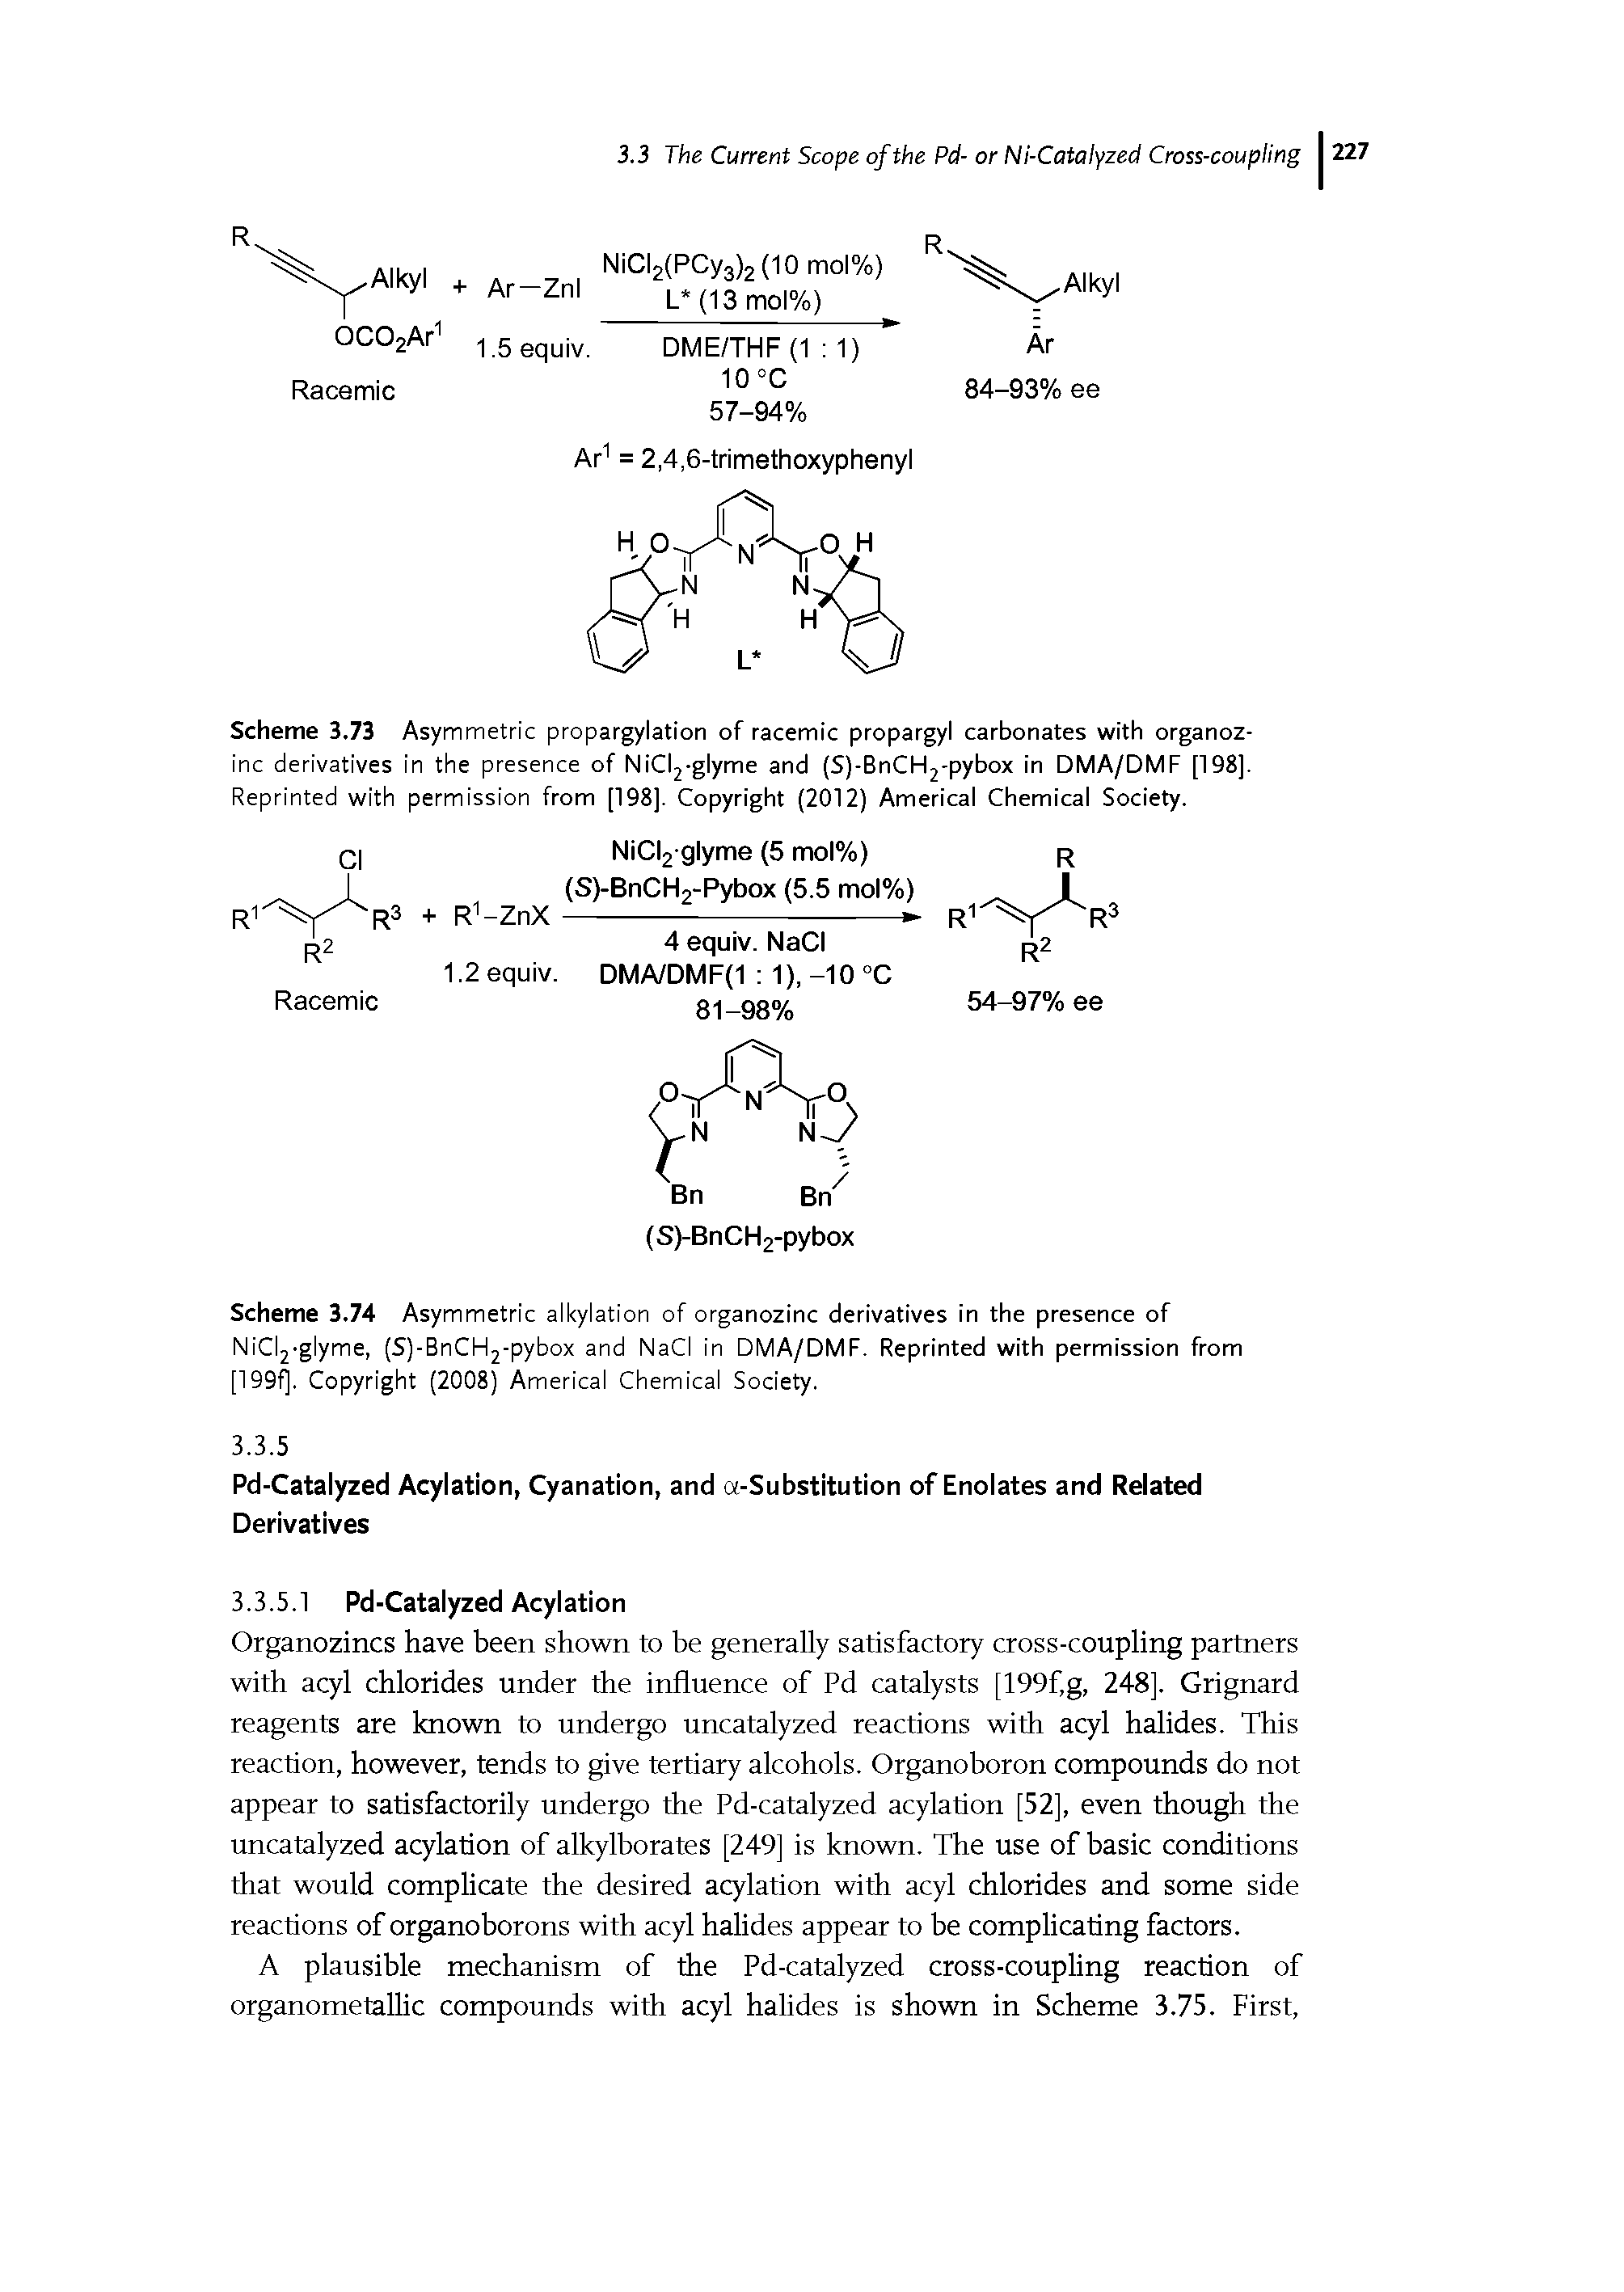 Scheme 3.73 Asymmetric propargylation of racemic propargyl carbonates with organoz-inc derivatives in the presence of NiClj-glyme and (S)-BnCH2-pybox in DMA/DMF [198]. Reprinted with permission from [198]. Copyright (2012) Americal Chemical Society.